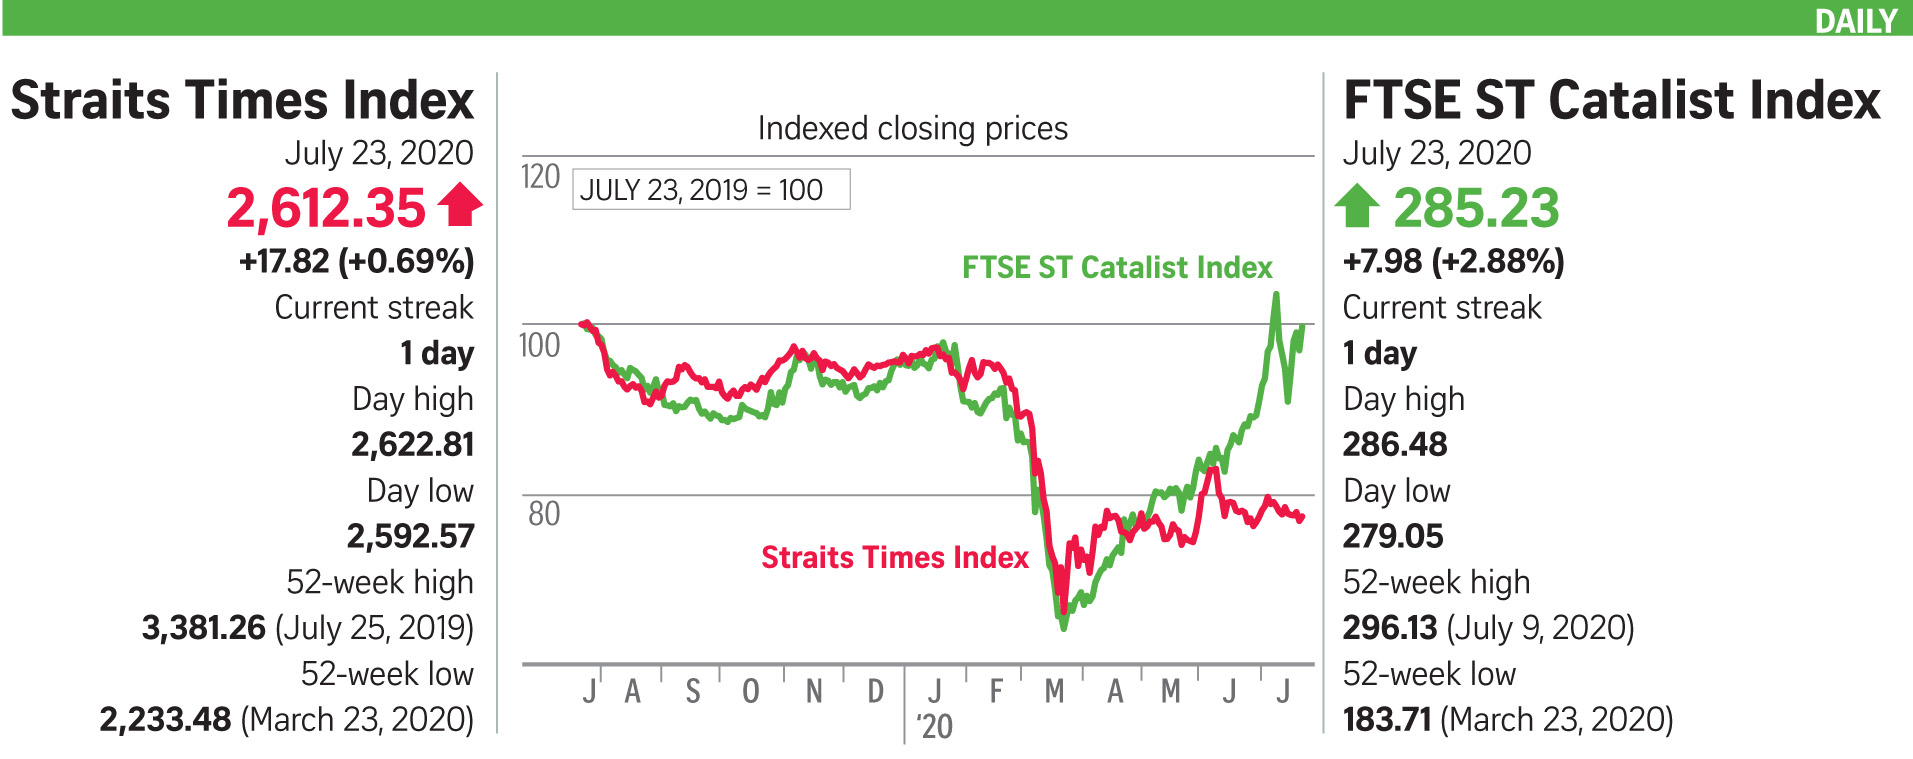 STI advances on gains in Reits, business trusts